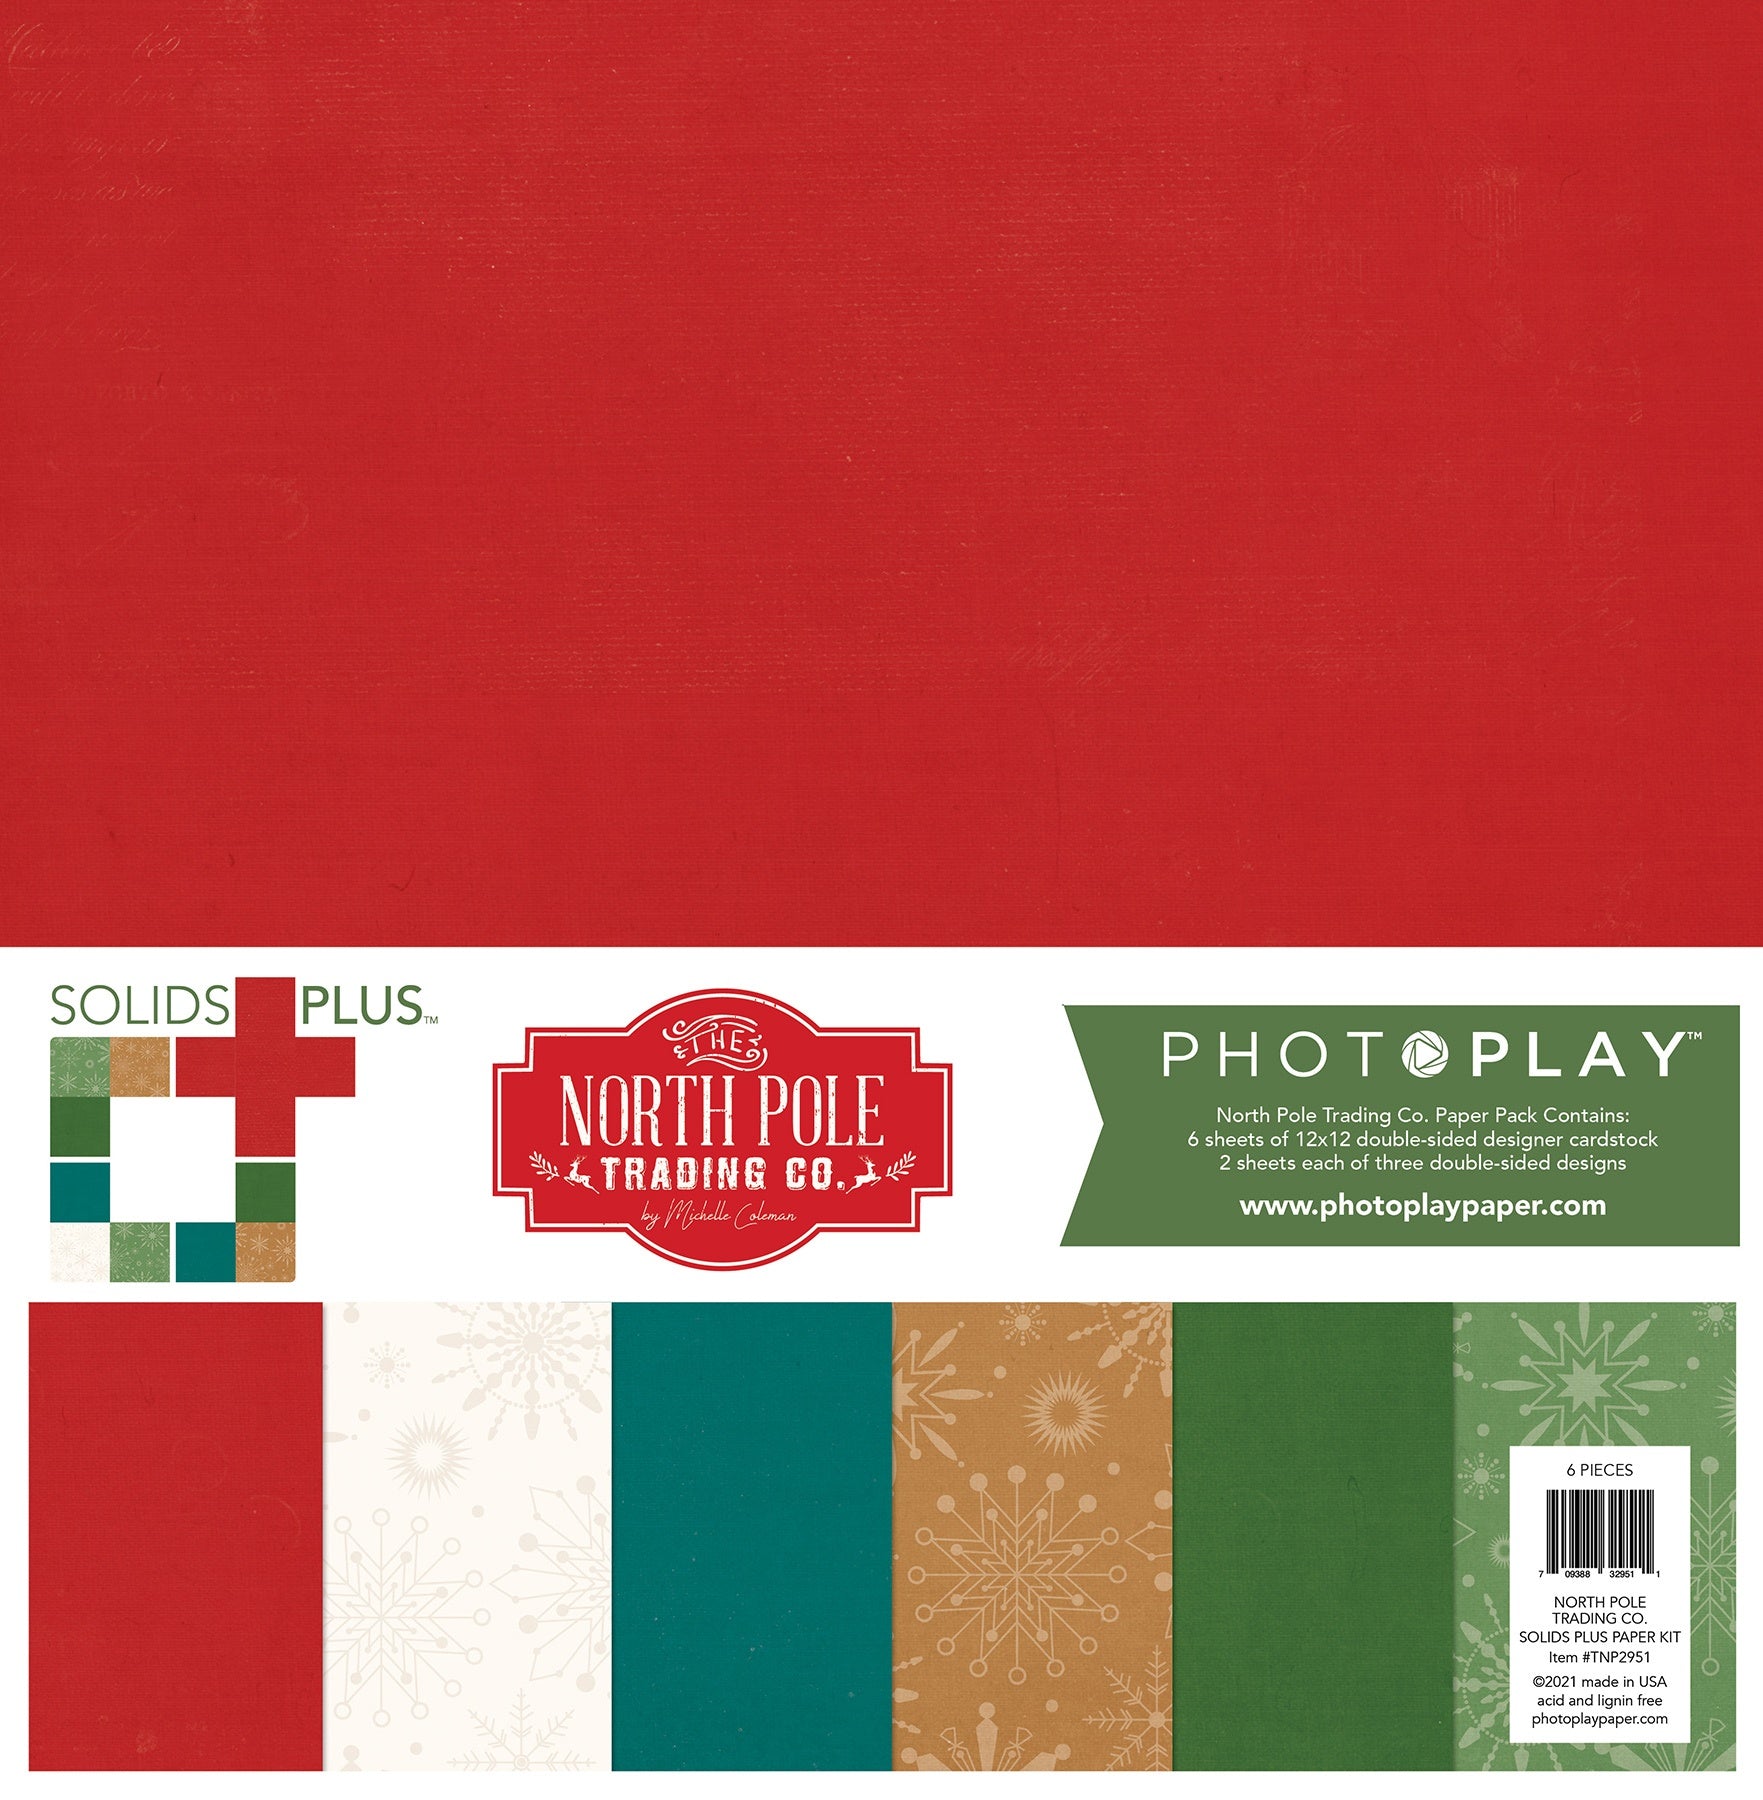 The North Pole Trading Co. Double-Sided Solids + Paper Pack